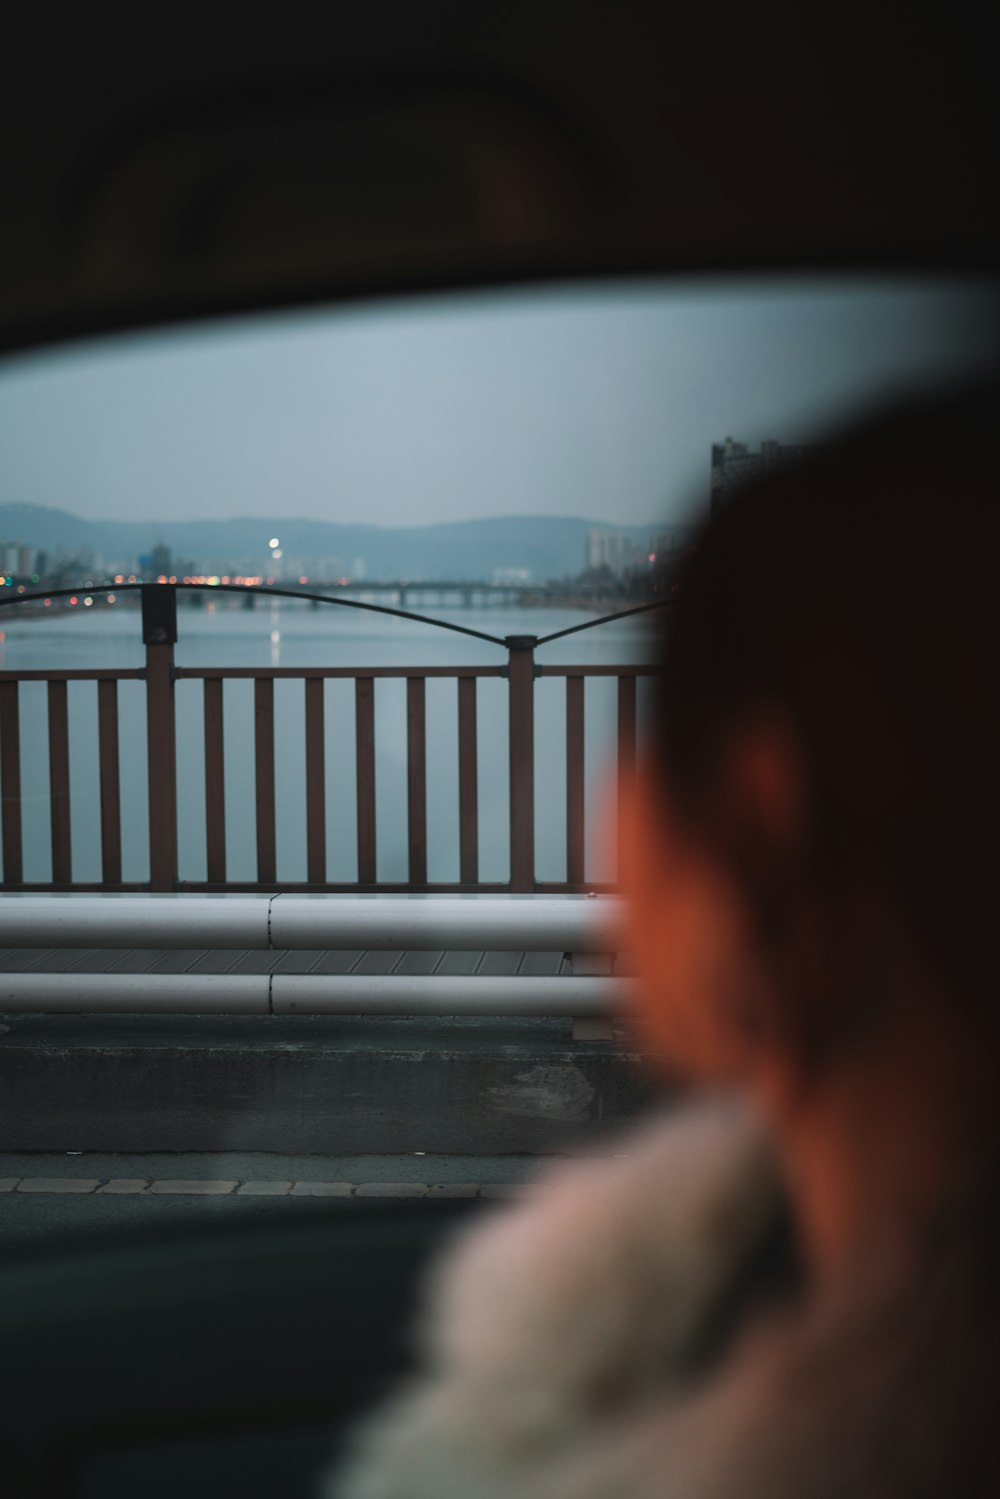 selective focus photography of woman inside car running on road near railing